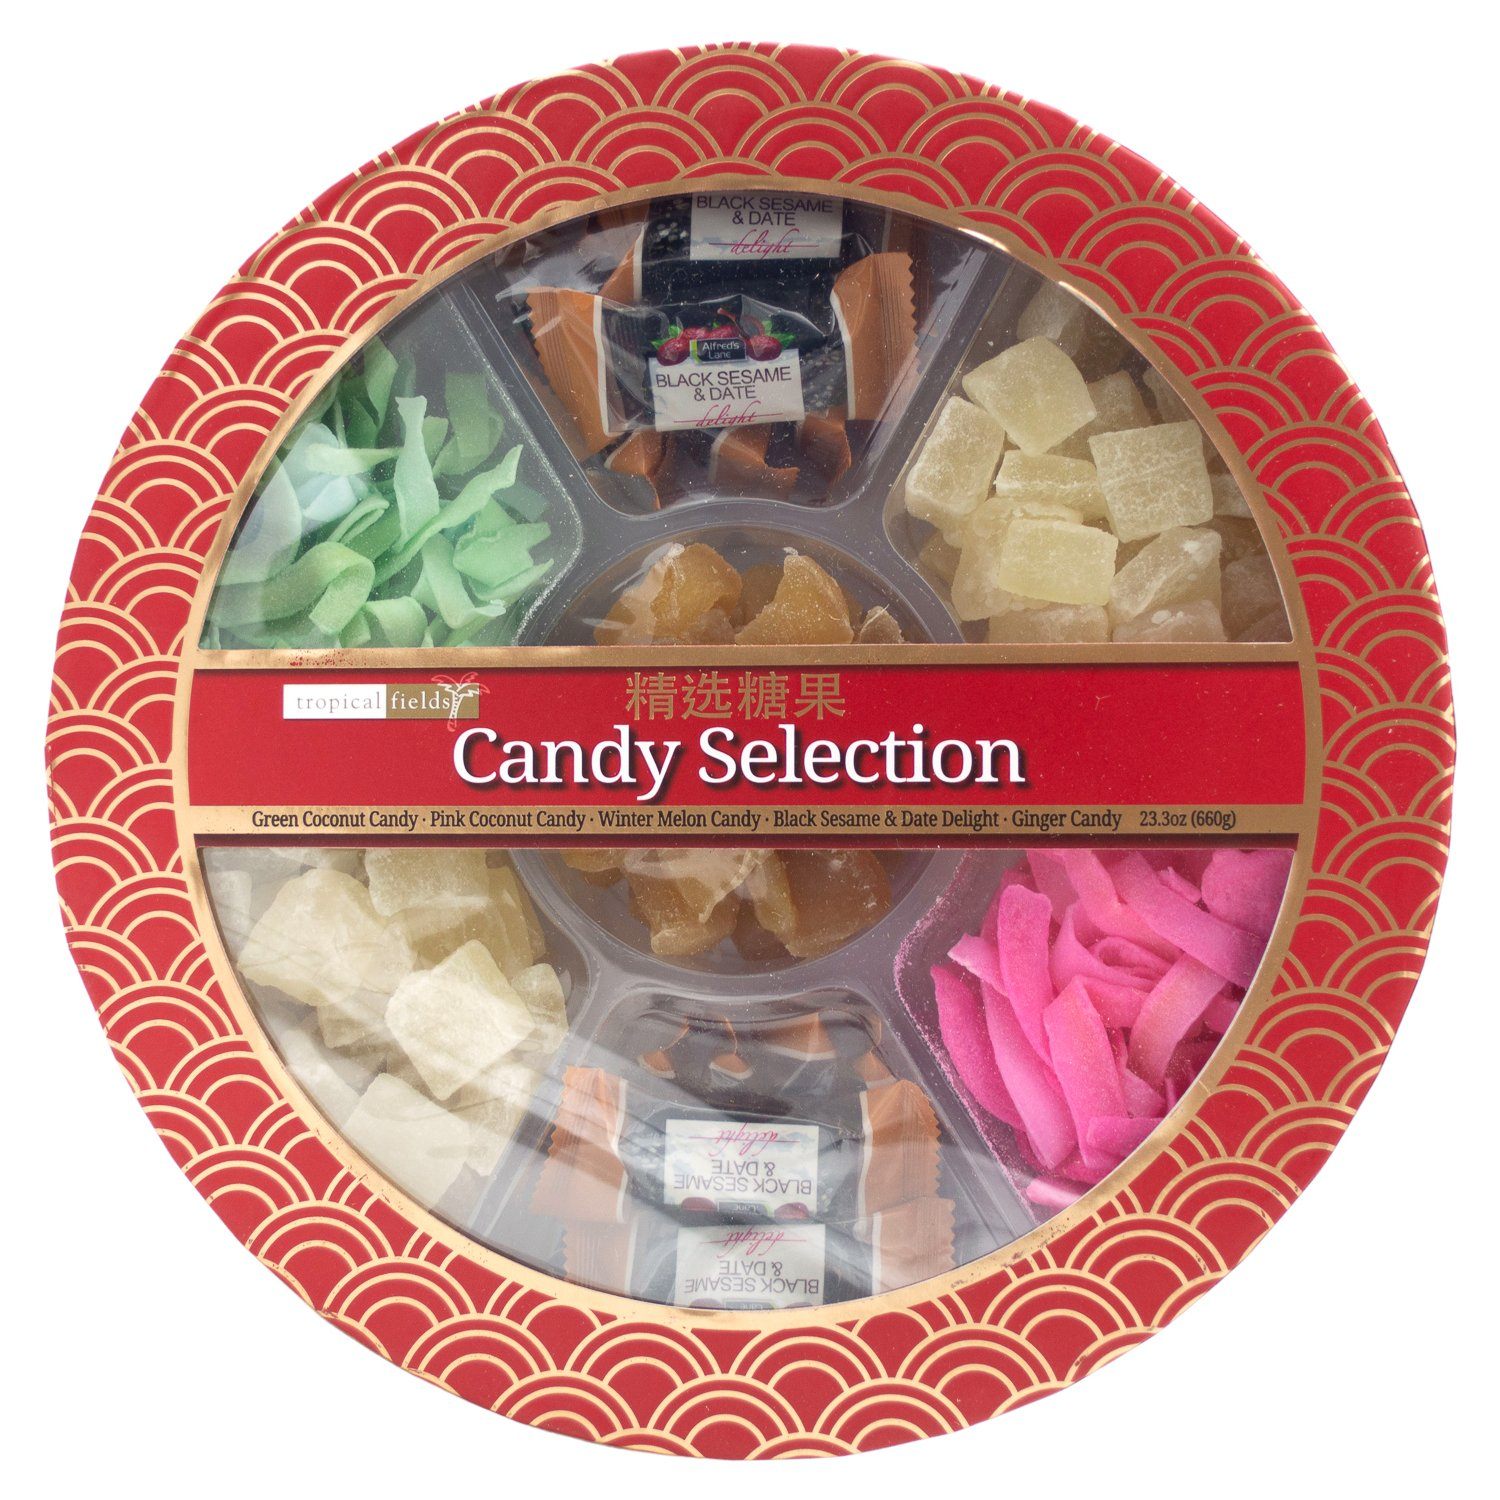 Tropical Fields Candy Selection Tropical Fields 23.3 Ounce 